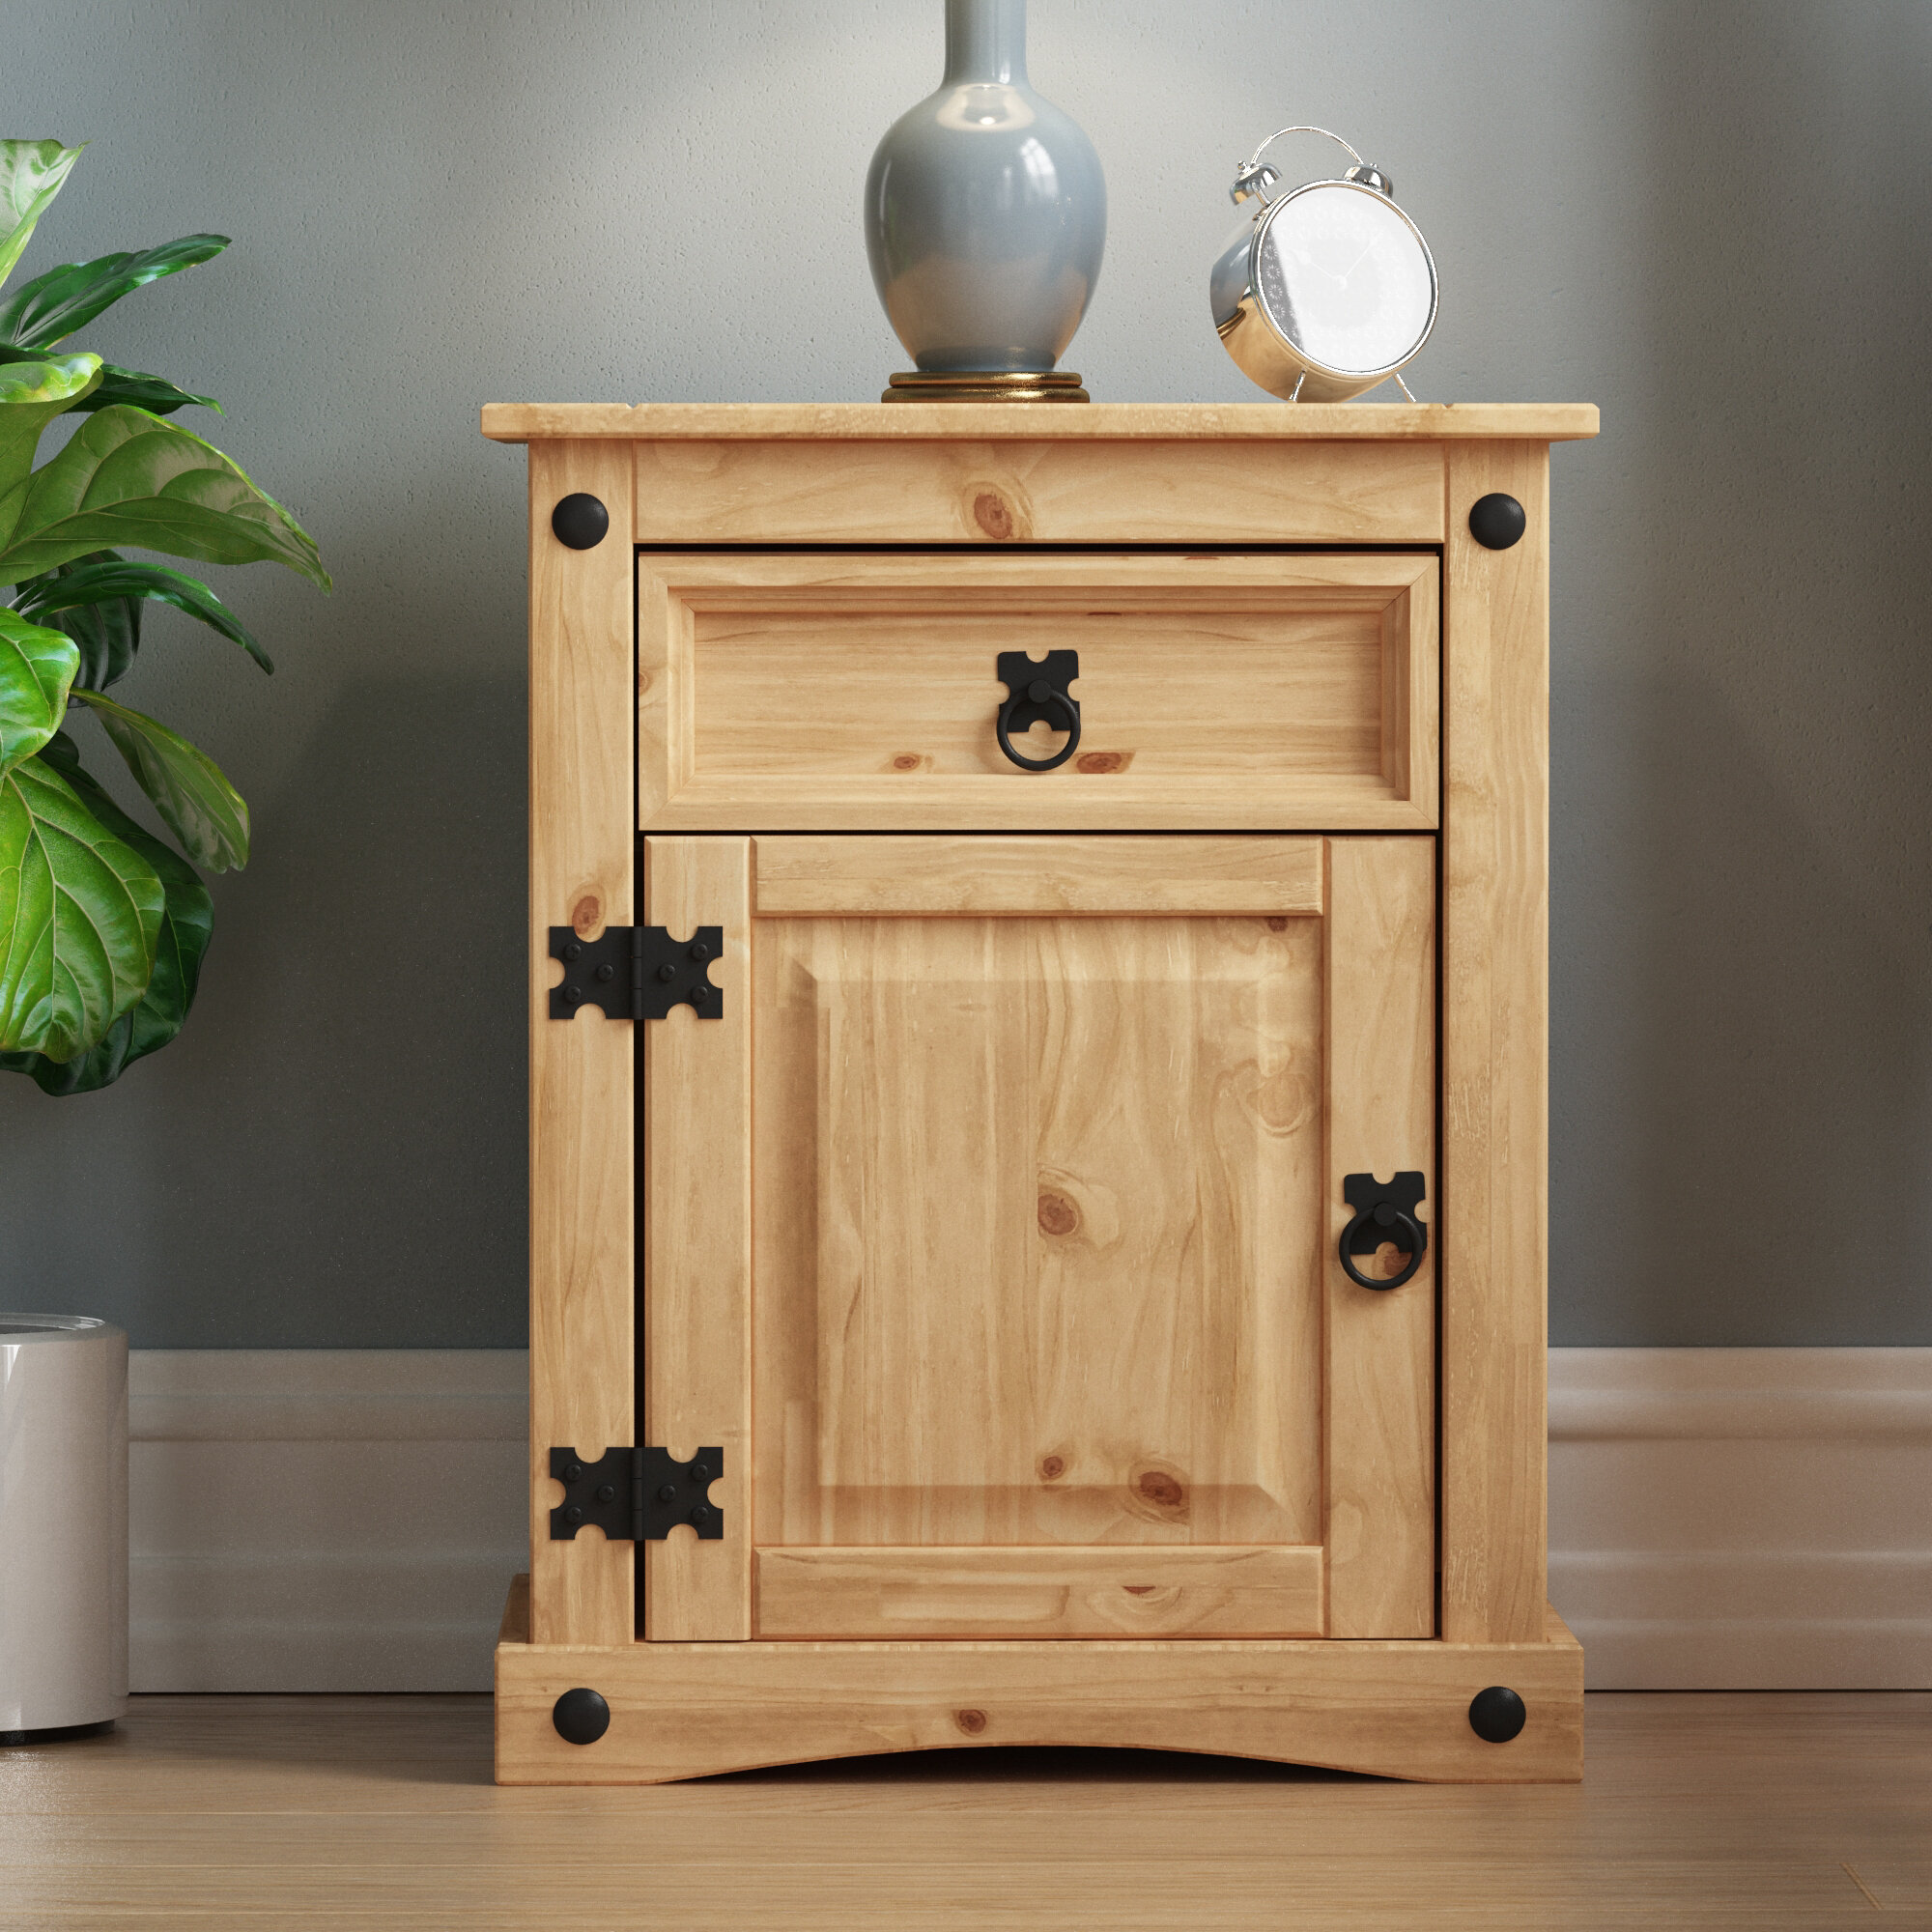 Home Source White Corona Solid Pine Bedside Cabinet 1 Door 1 Drawer Night Stand Table Waxed